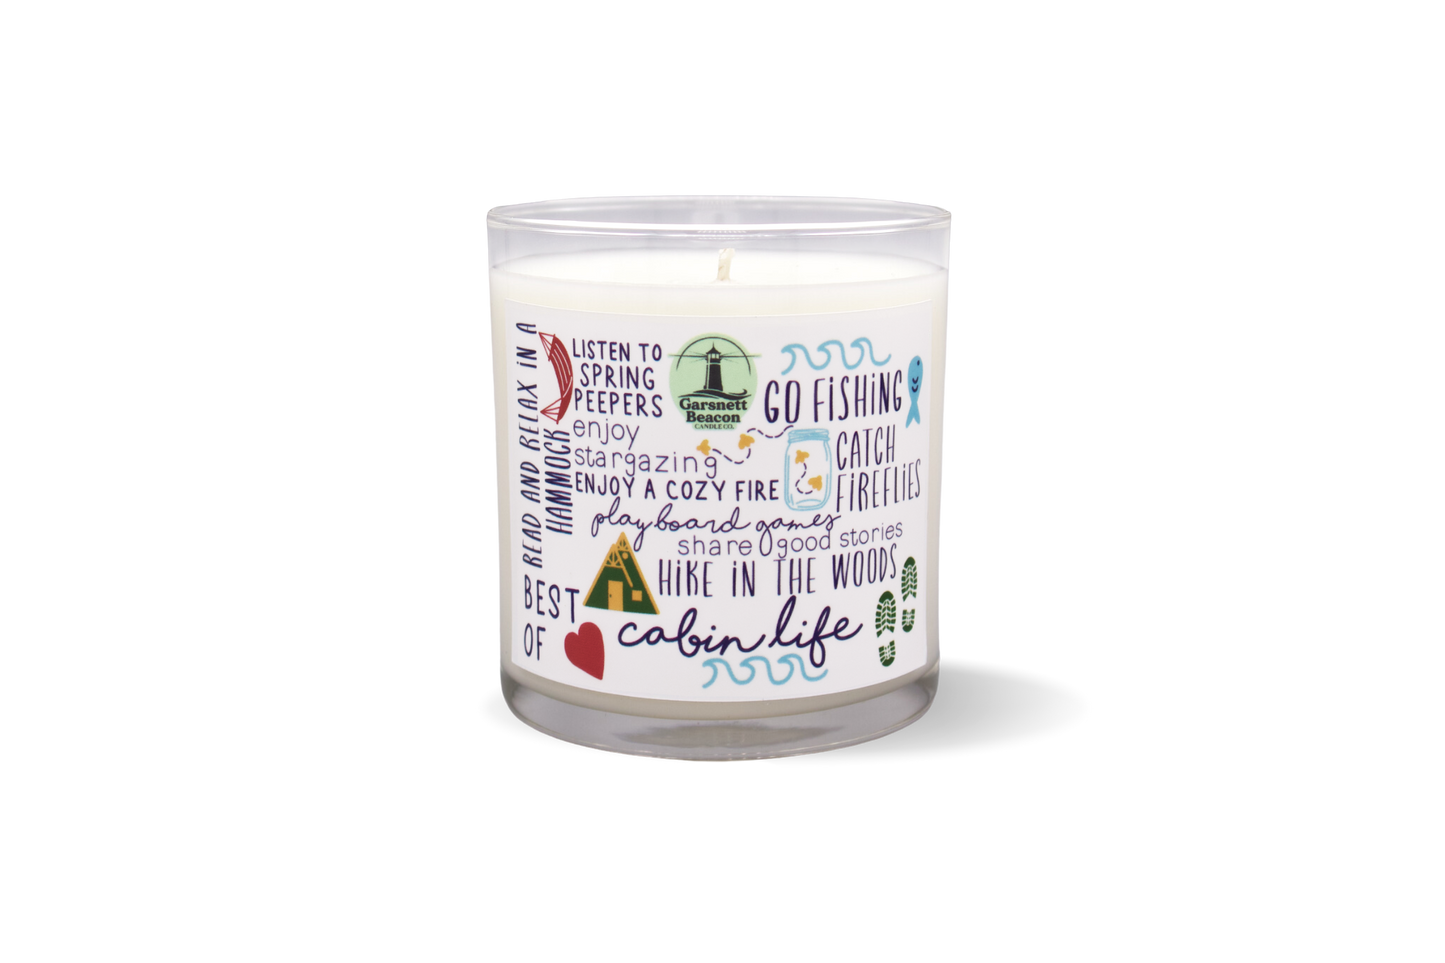 Best of Cabin Life Candle